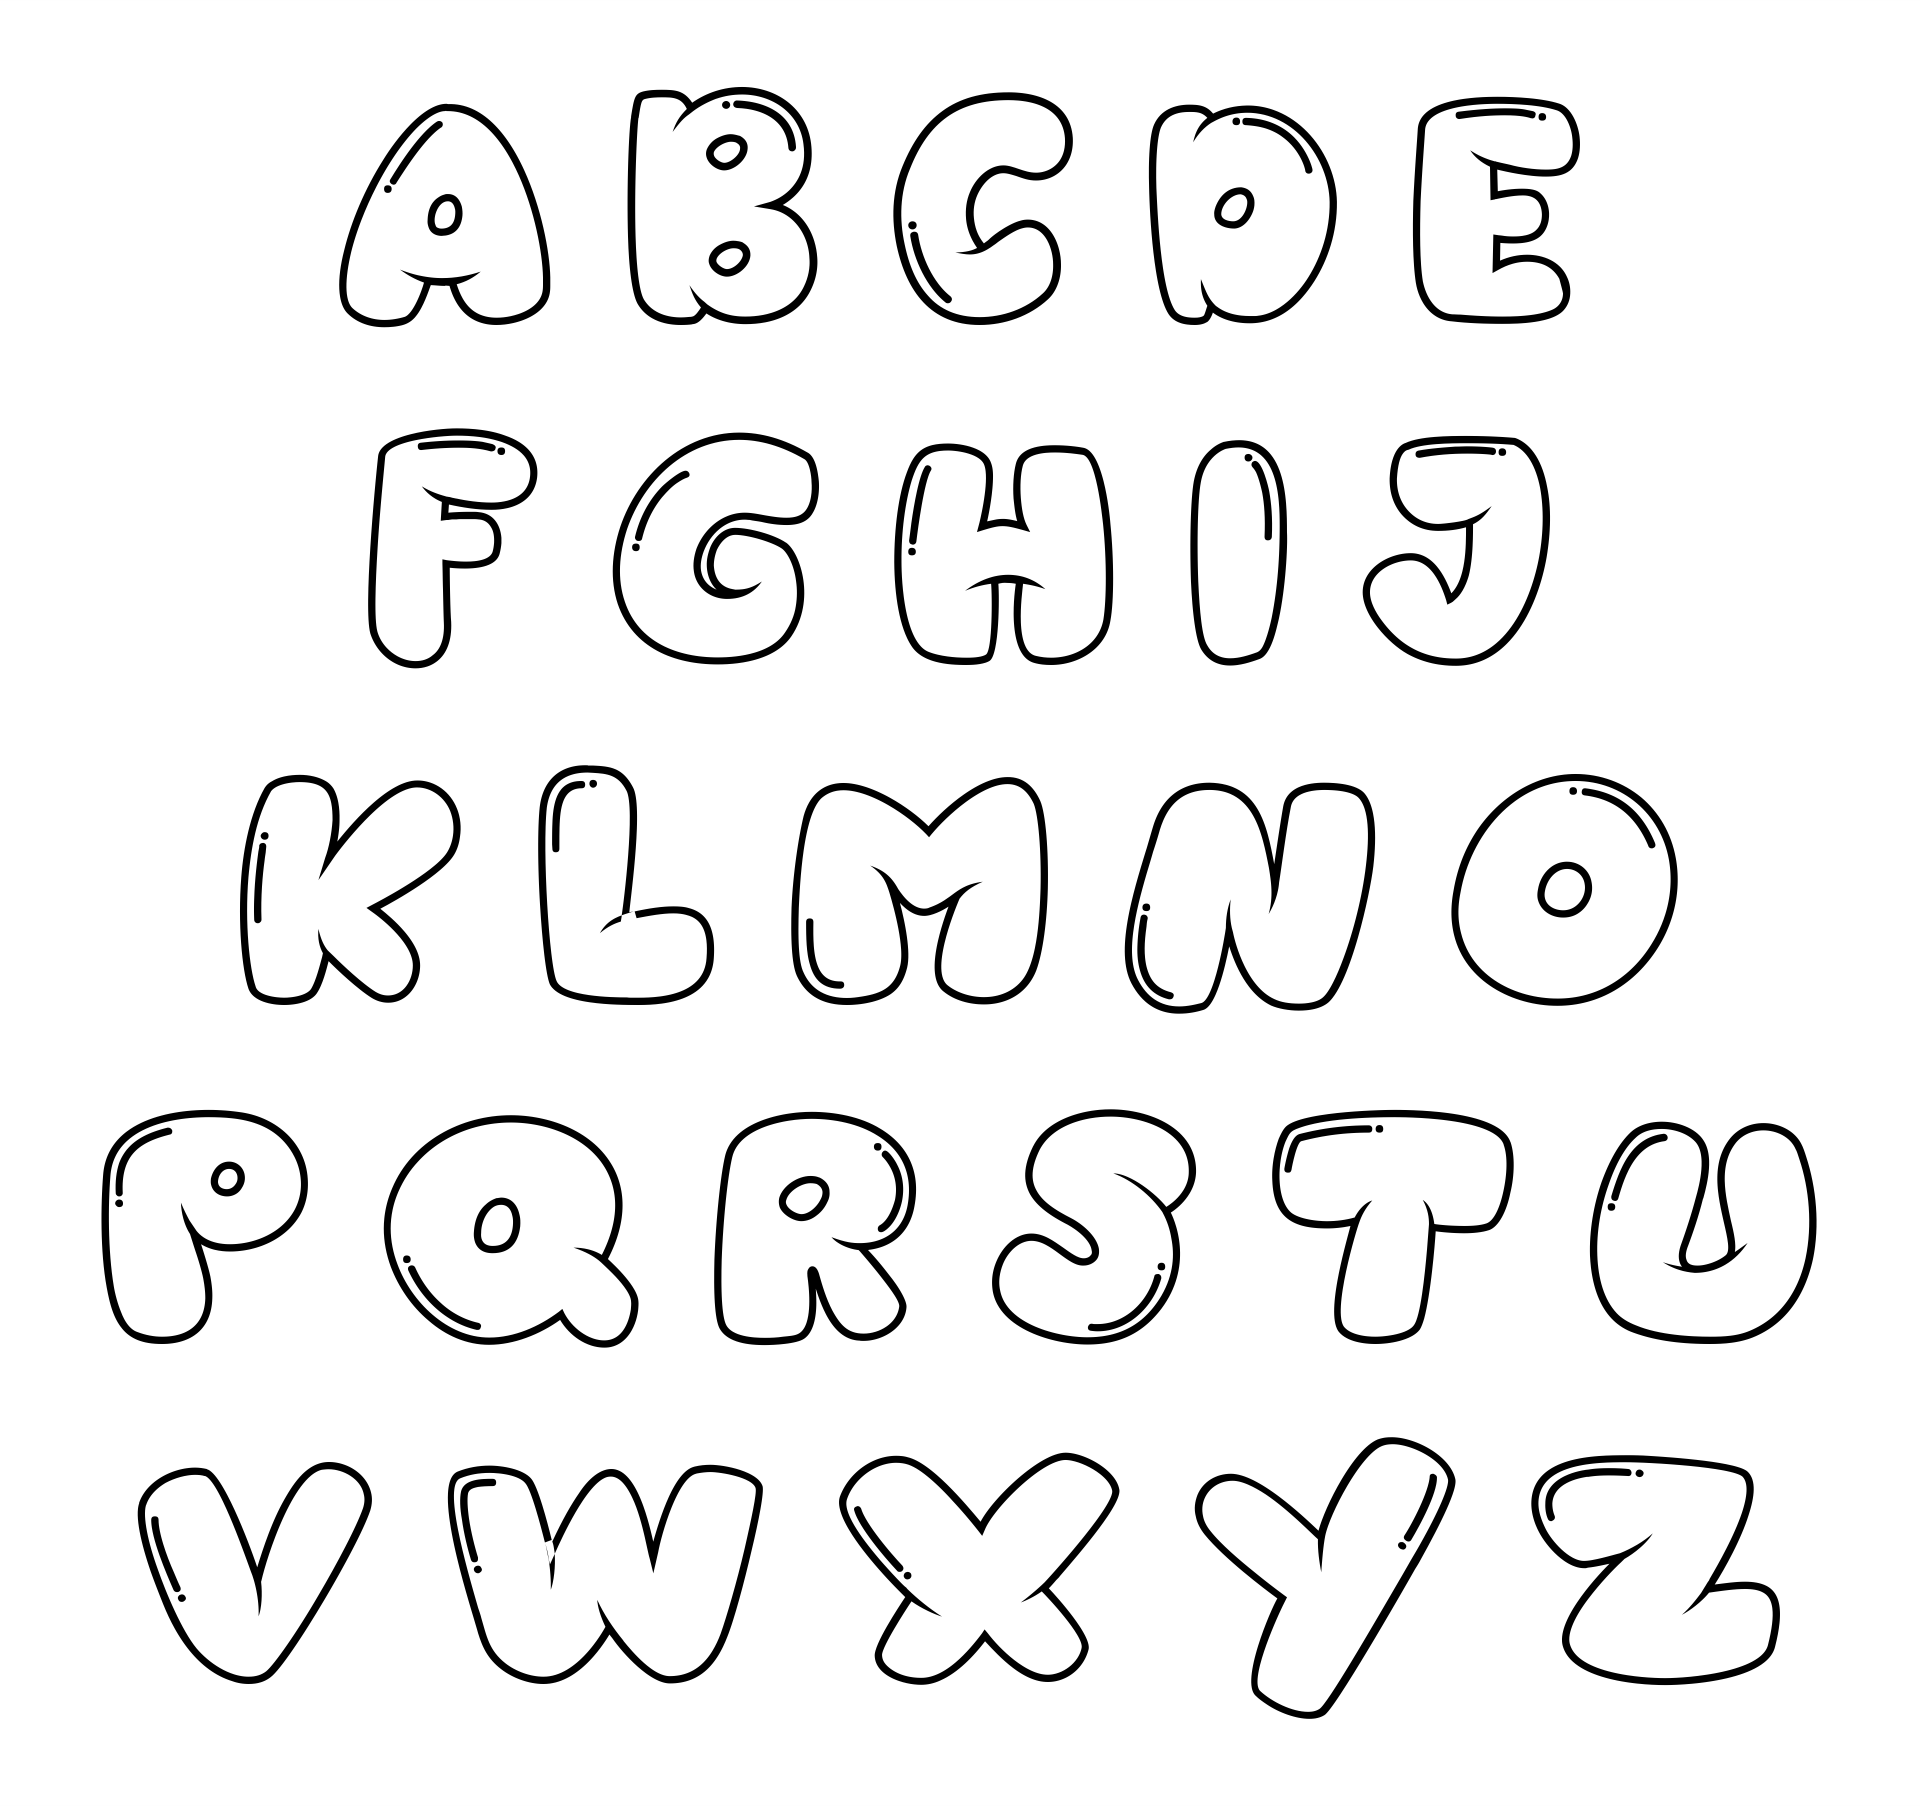 font for bubble letters in word